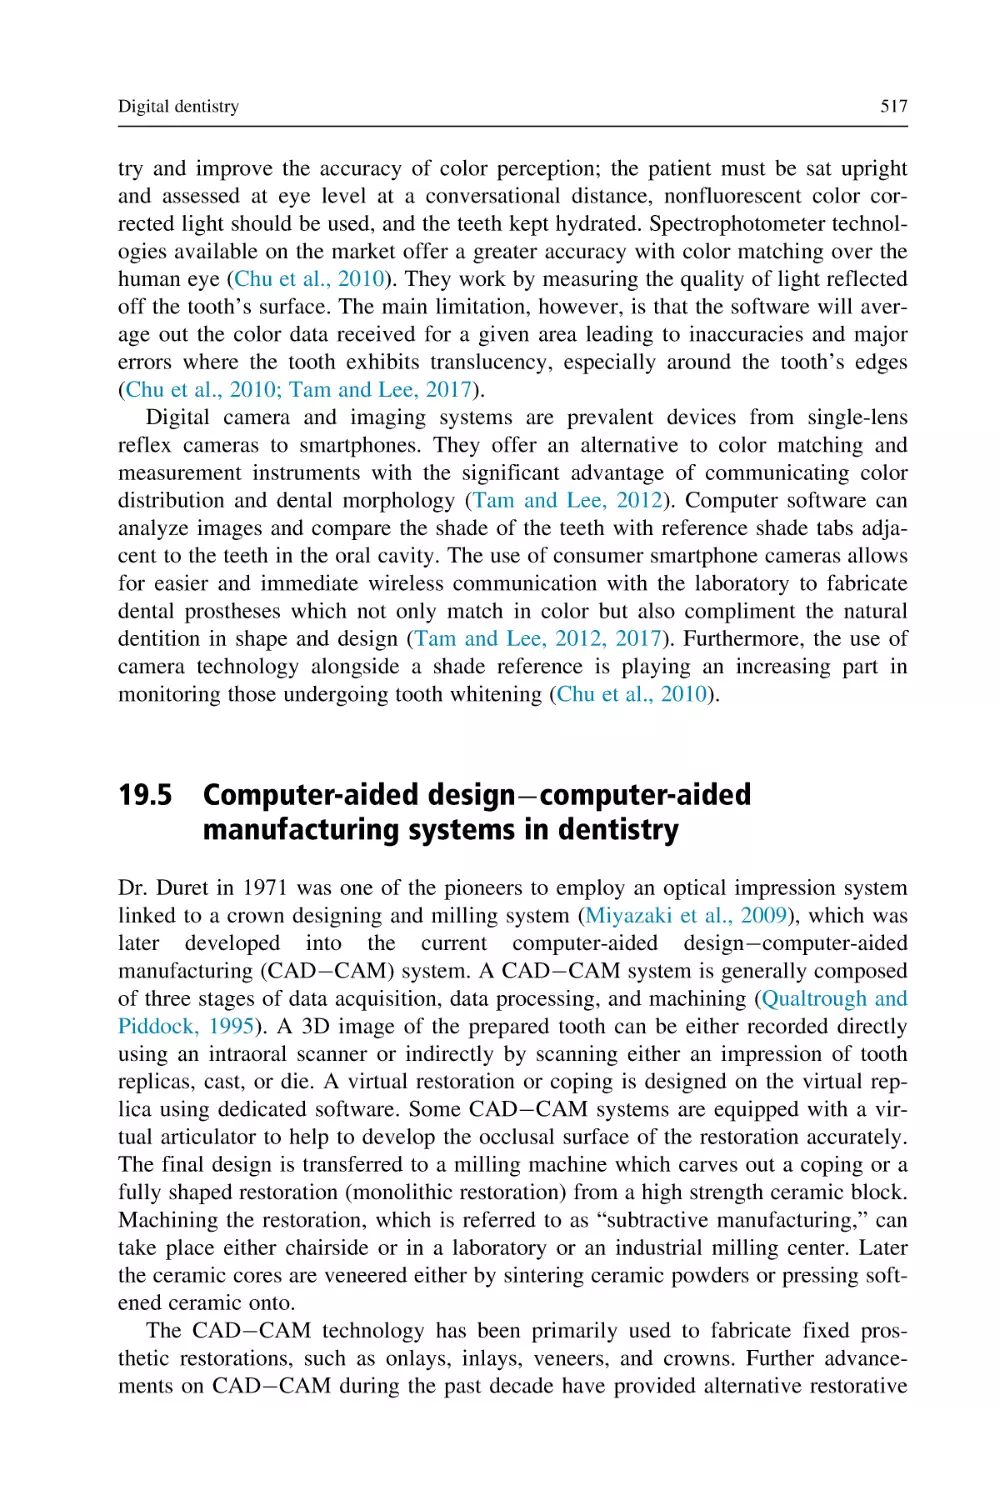 19.5 Computer-aided design–computer-aided manufacturing systems in dentistry